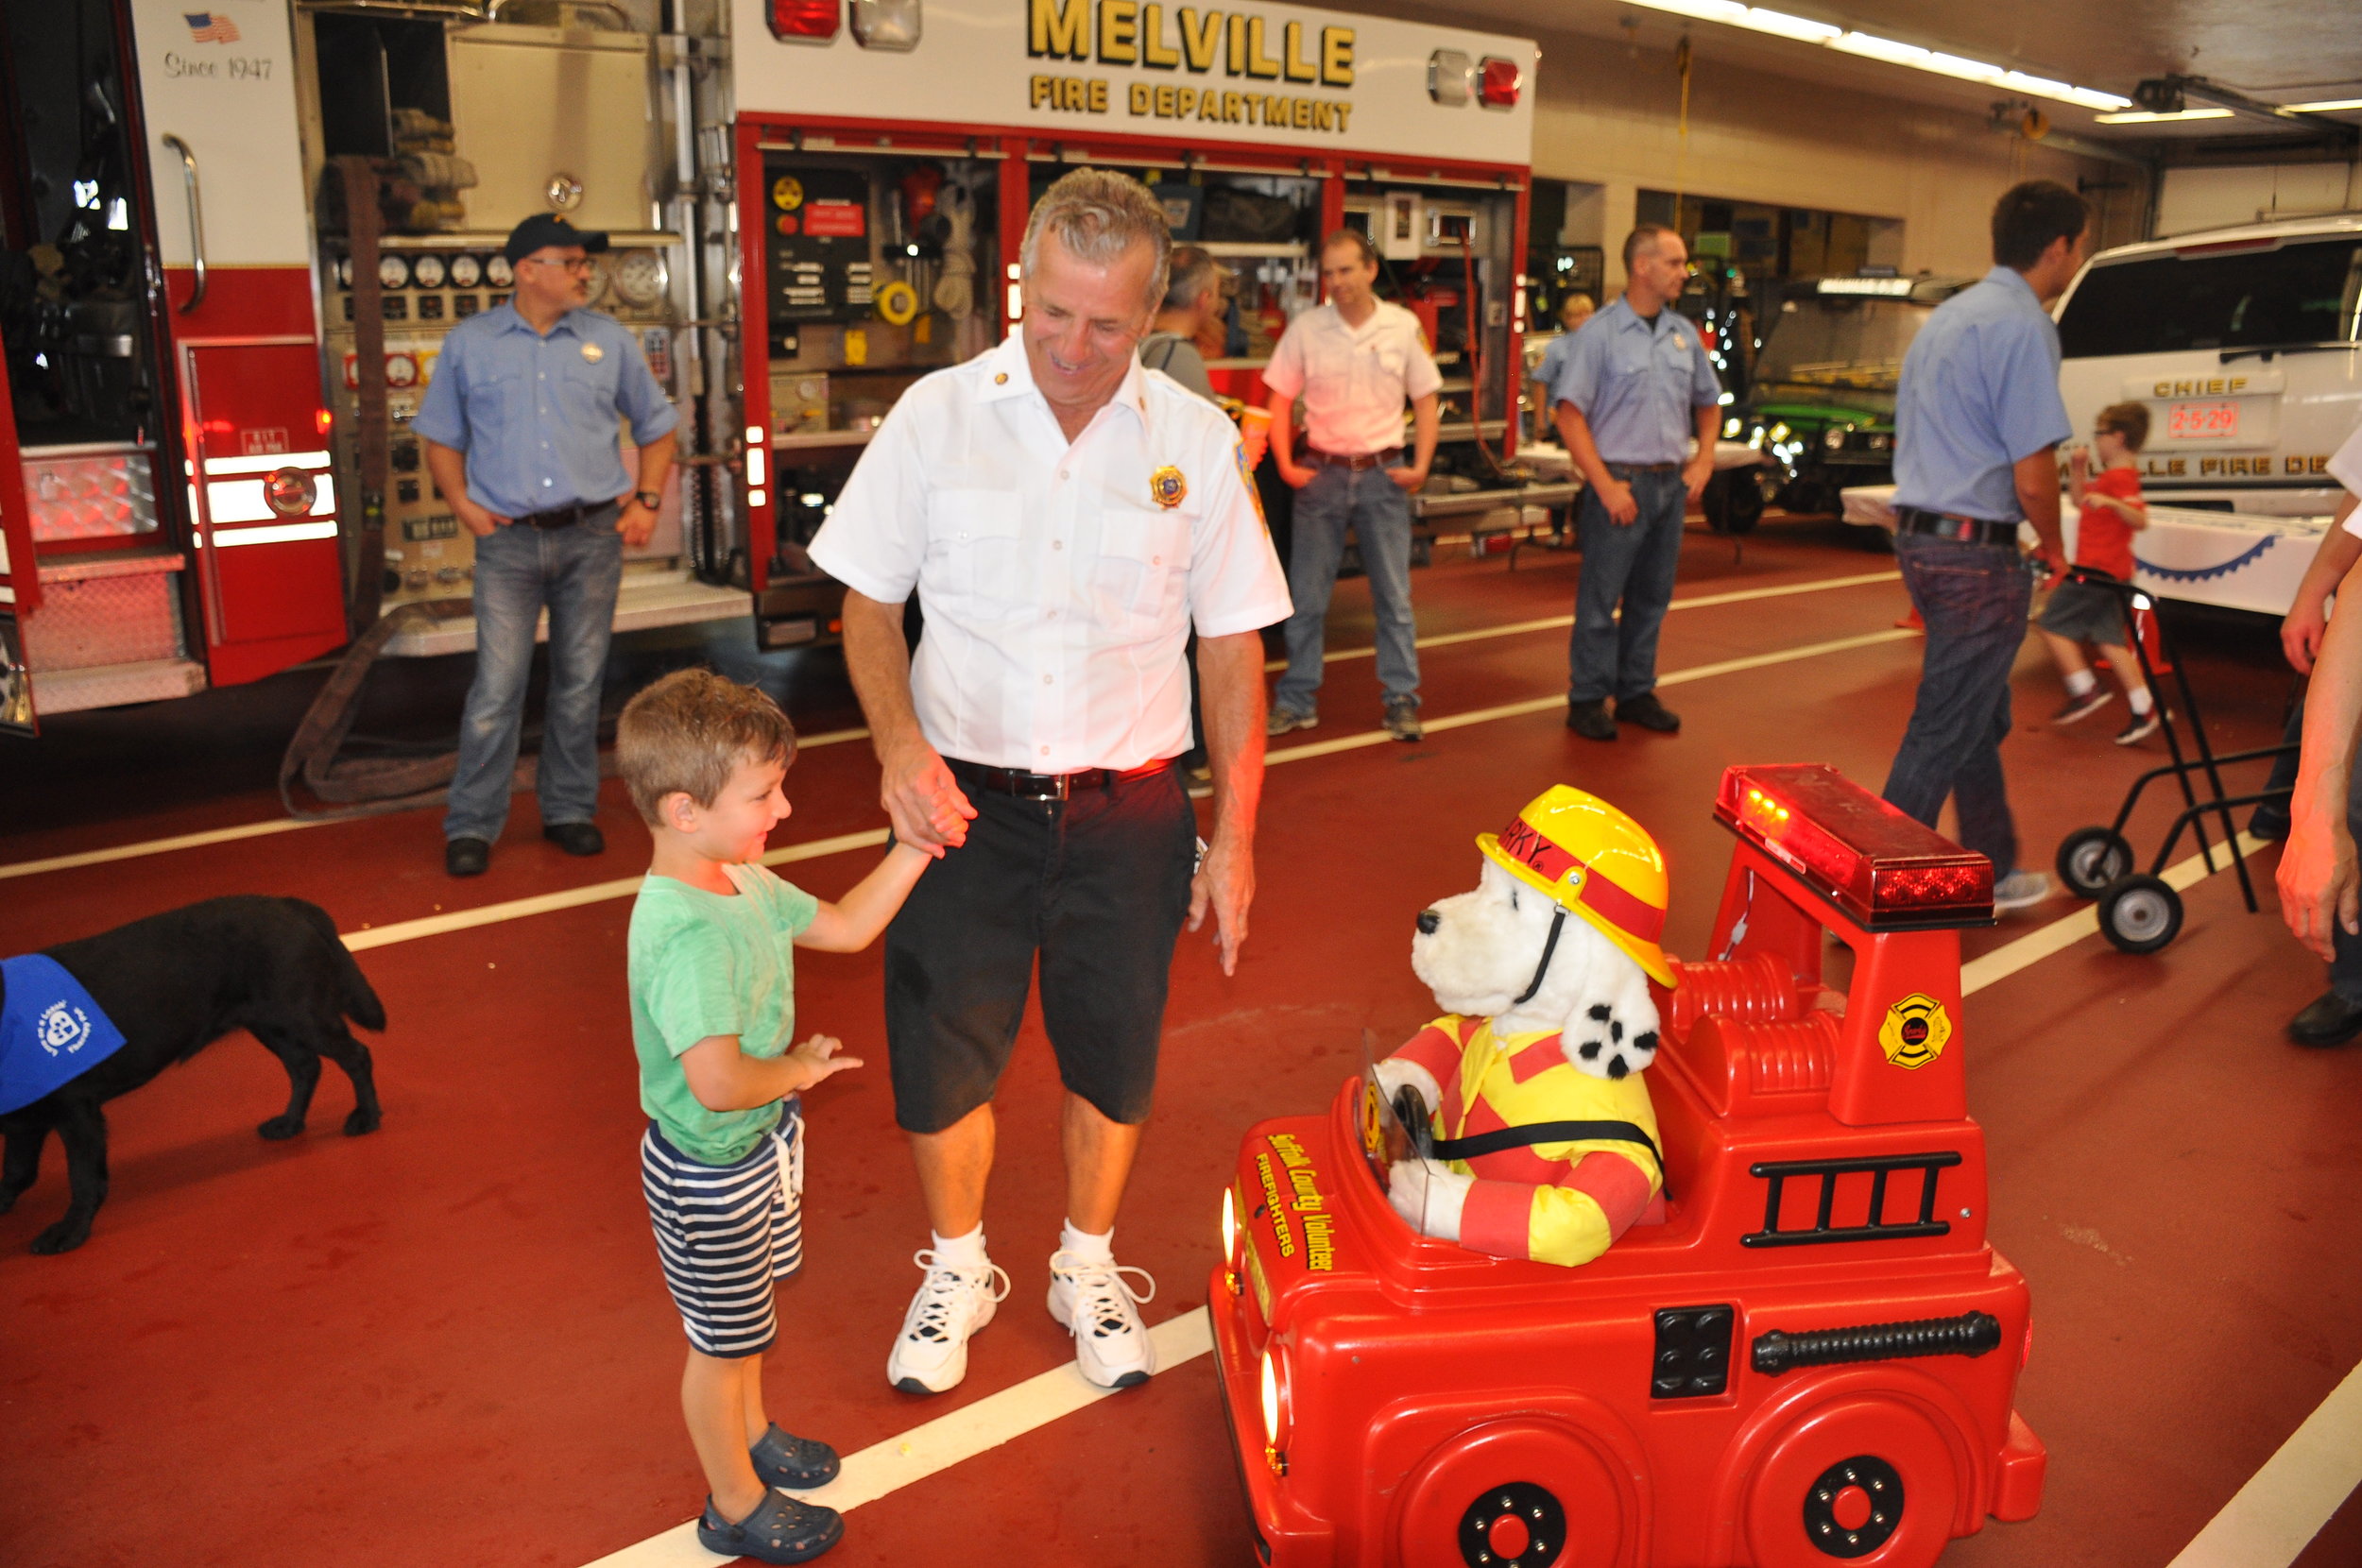   The open house drew hundreds, including families with children, who got to explore Melville fire headquarters.   Photo by Steve Silverman  